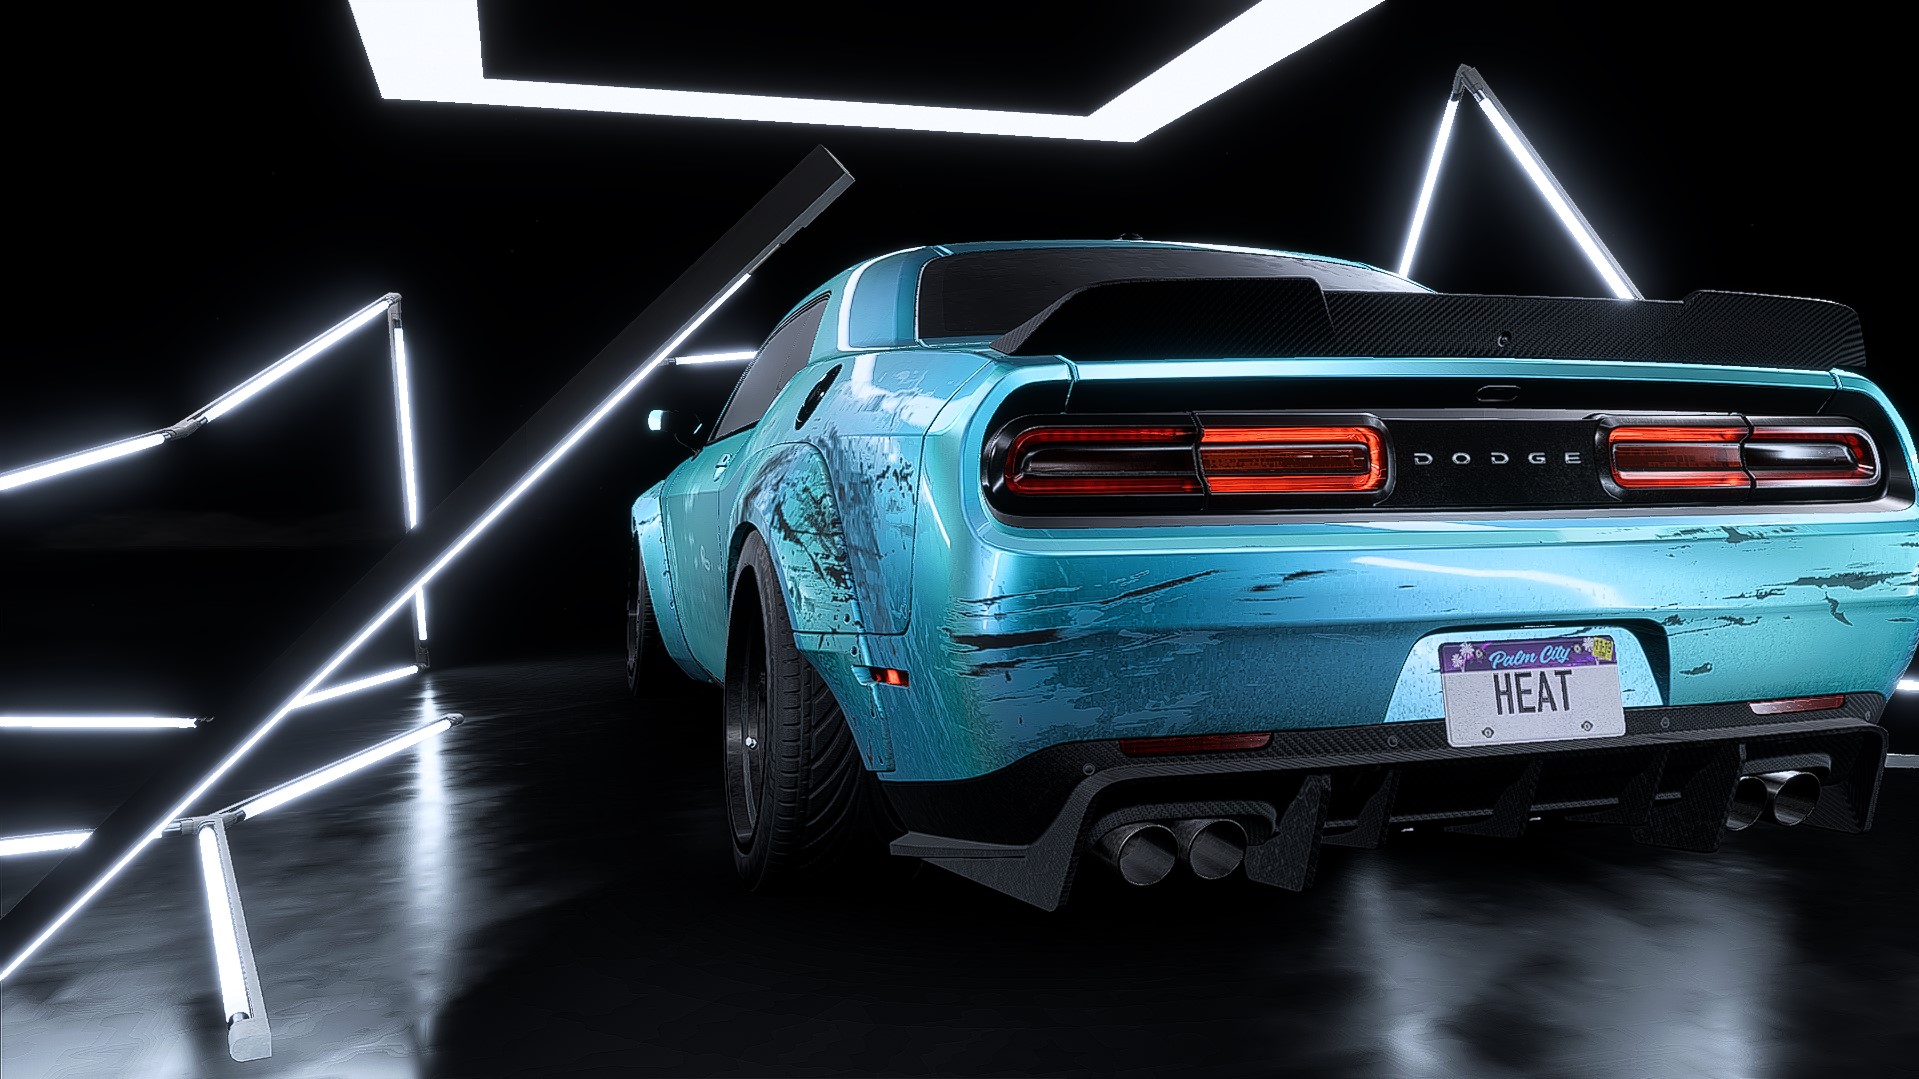 General 1919x1079 Need for Speed Need for Speed: Heat Dodge Challenger video games Dodge muscle cars bodykit American cars Stellantis Ghost Games Electronic Arts V8 engine